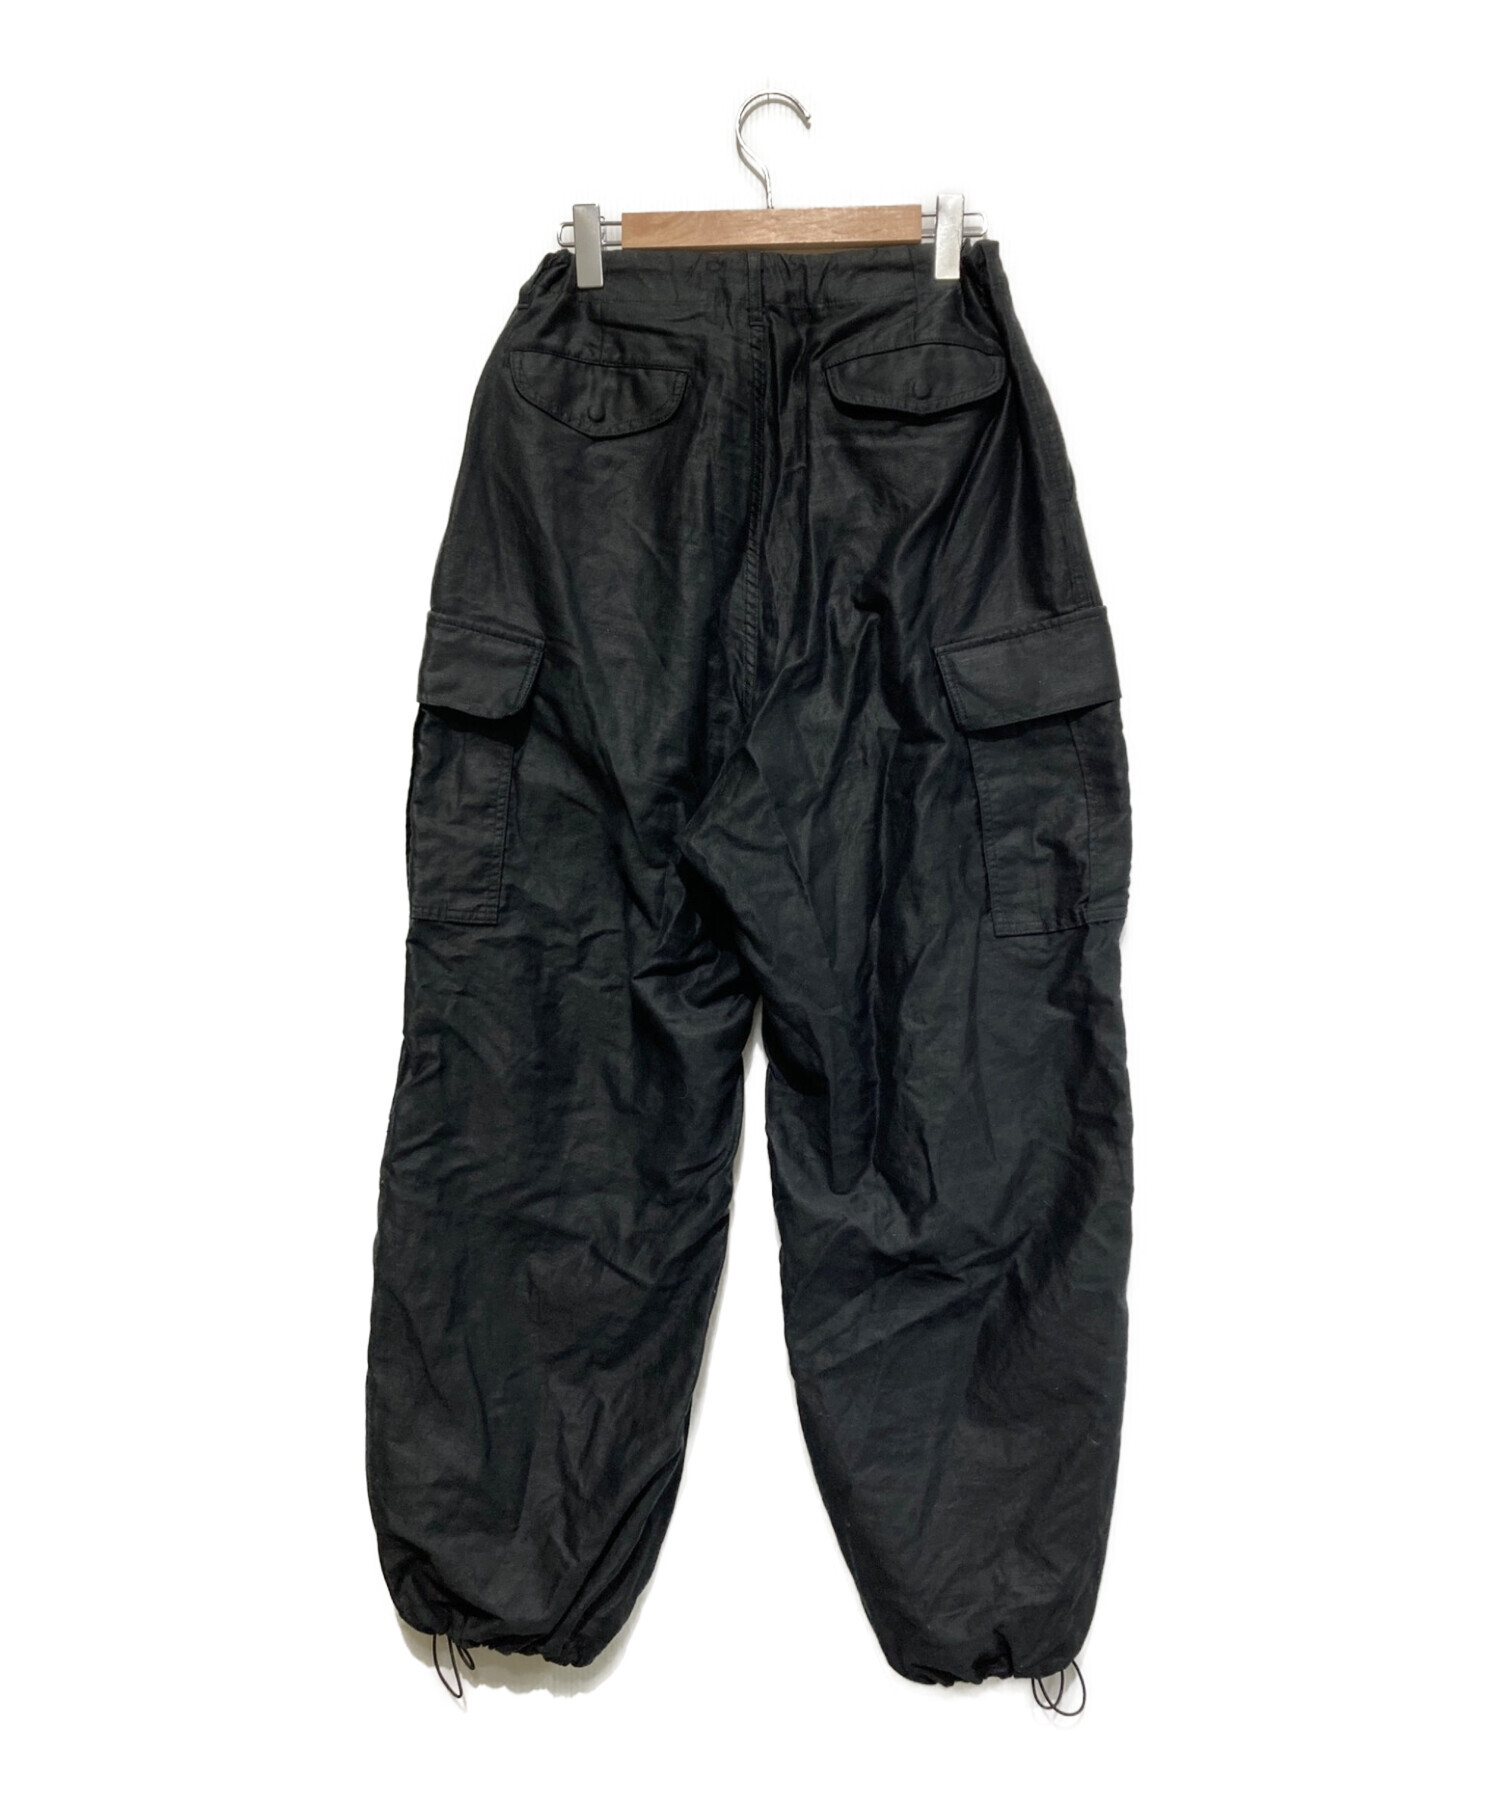 Used military lining pants